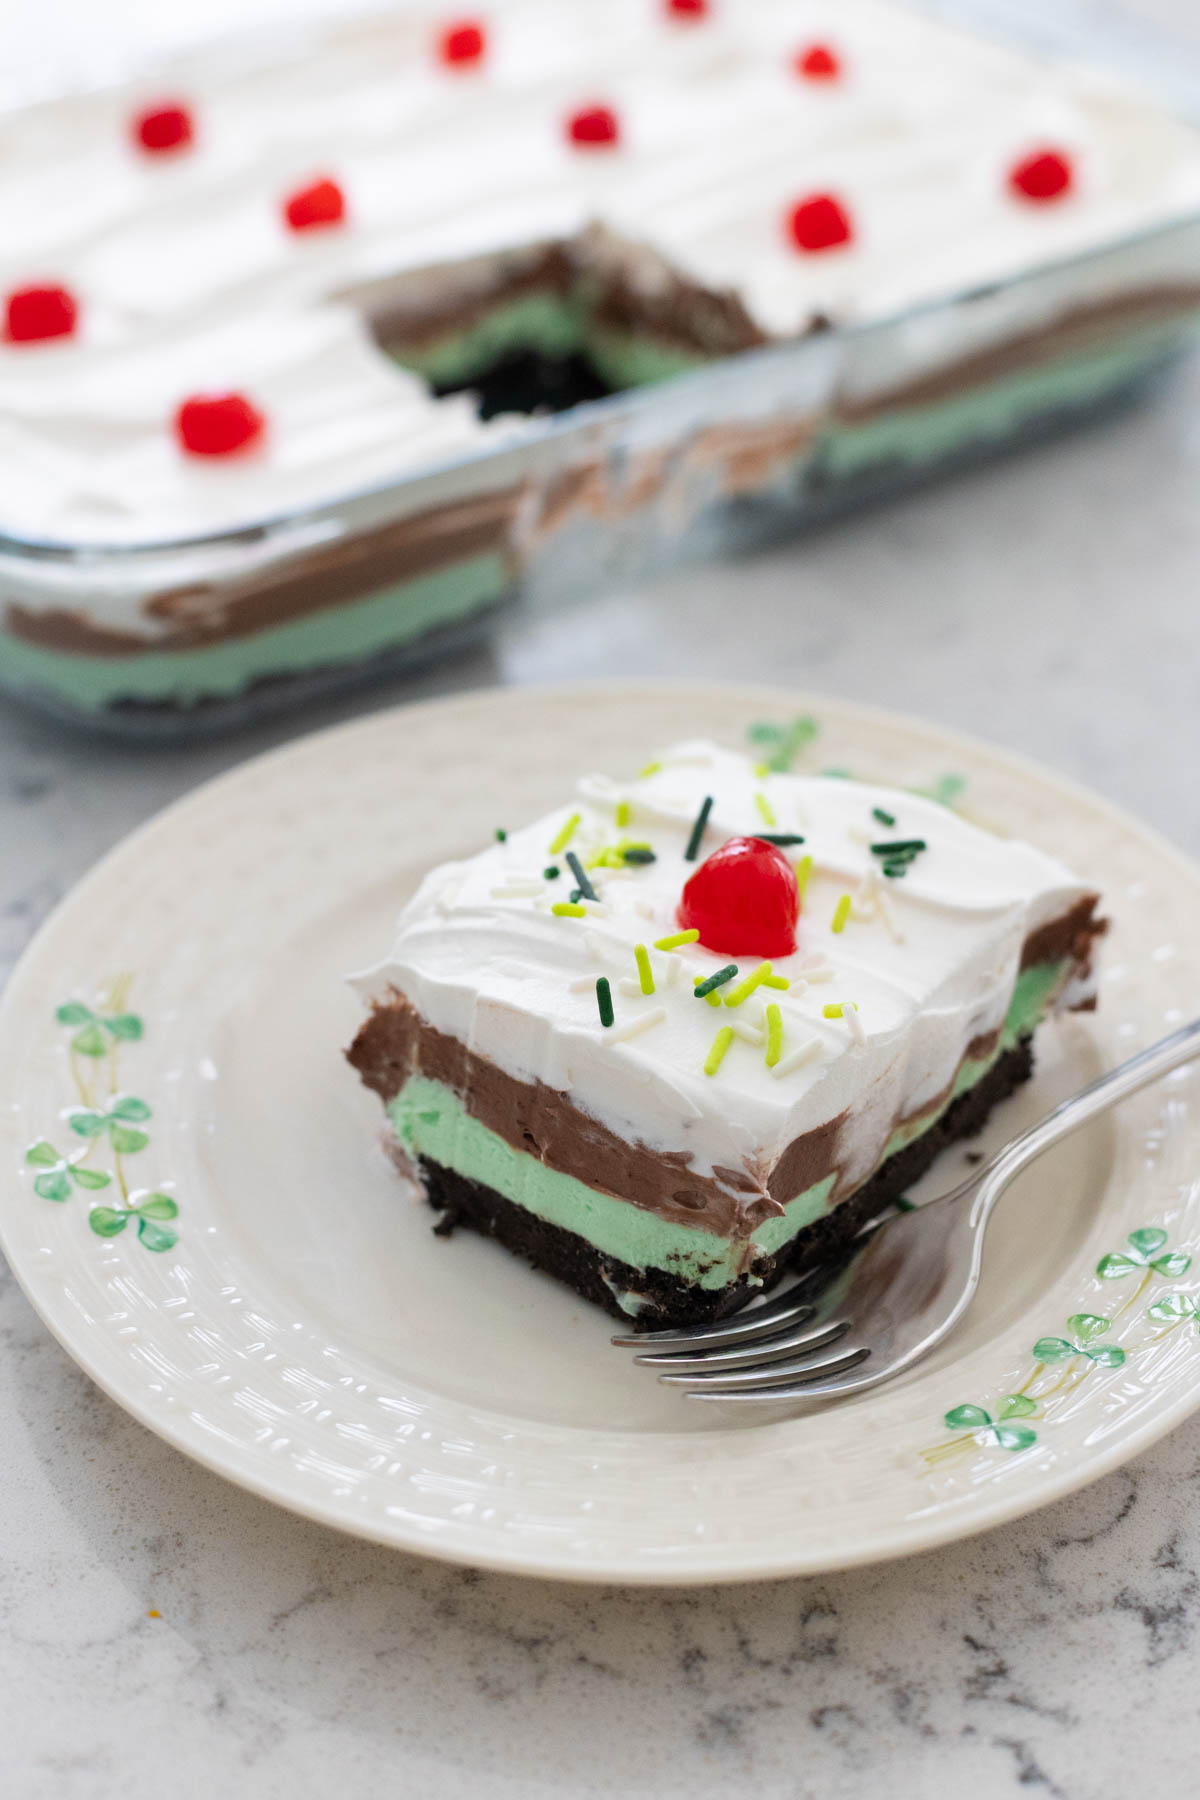 The layered no-bake dessert is on a party plate. You can see the light green cream cheese layer and chocolate pudding layer under the whipped topping and sprinkles.